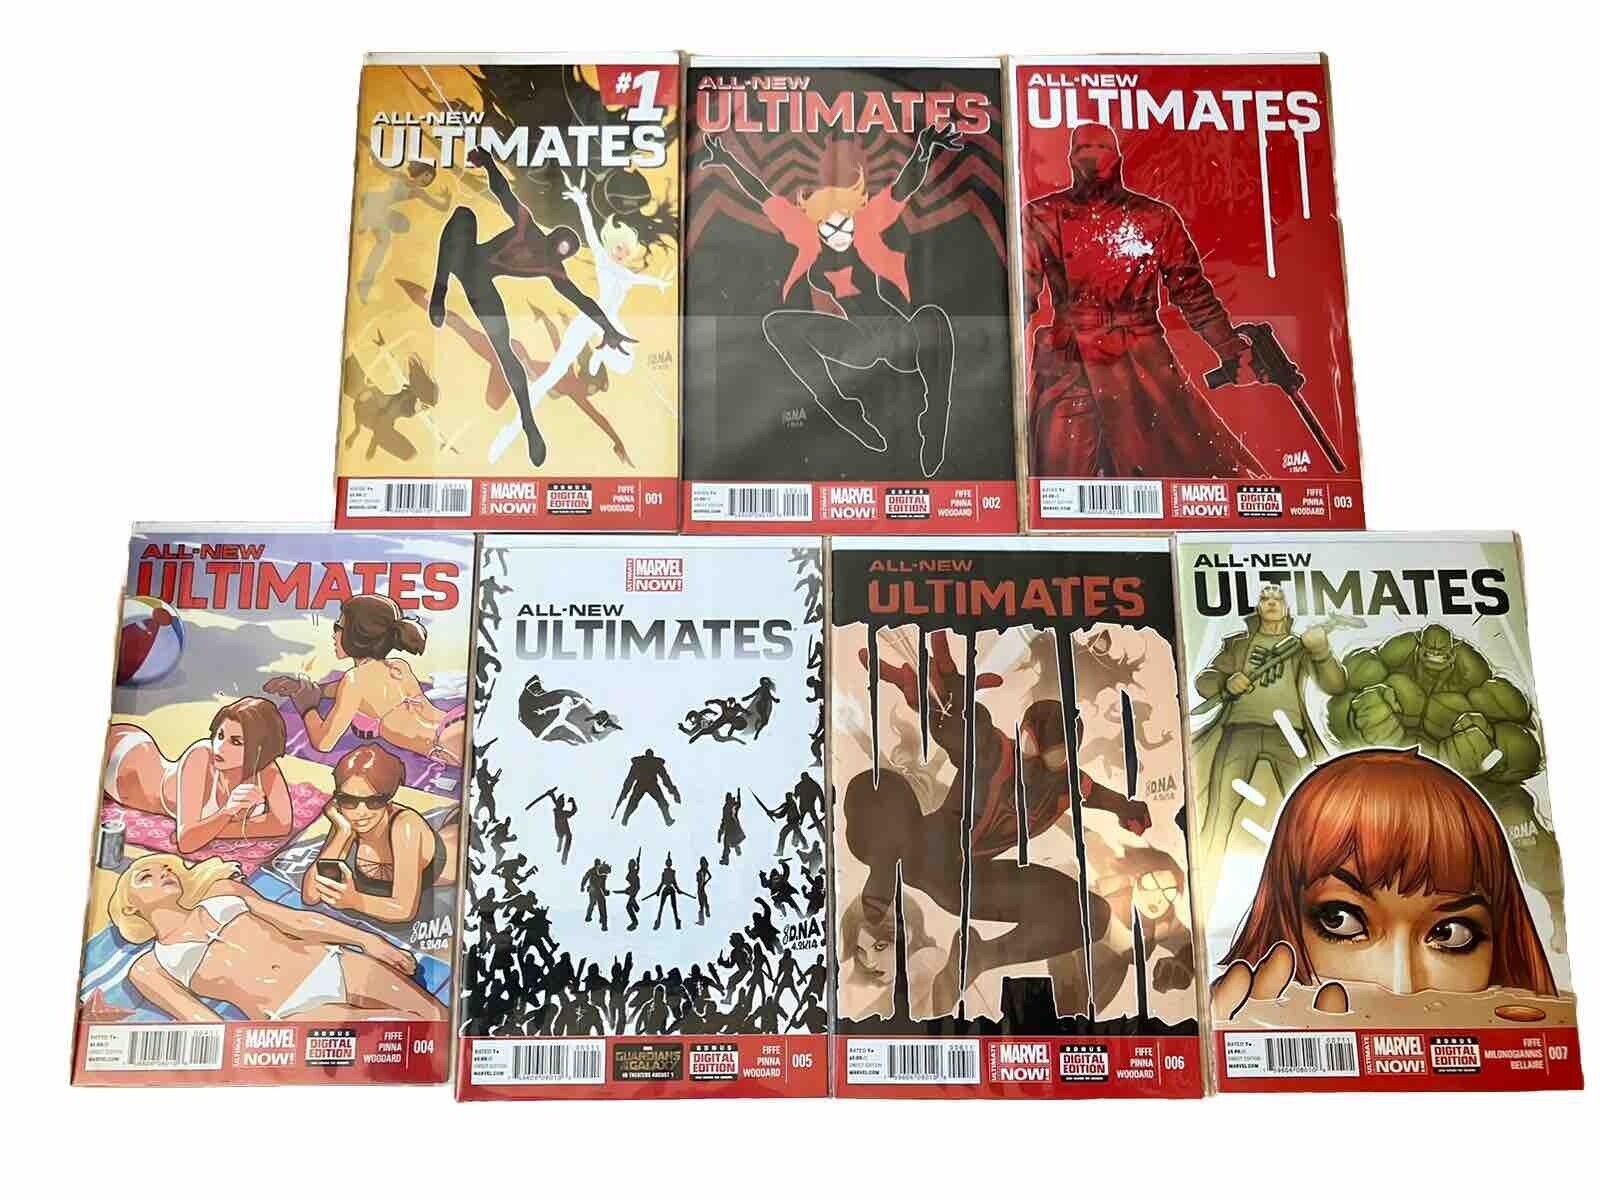 ALL-NEW ULTIMATES #1, 2, 3, 4, 5, 6, 7 (Marvel, 2014) Spider-Man, Spider-Woman